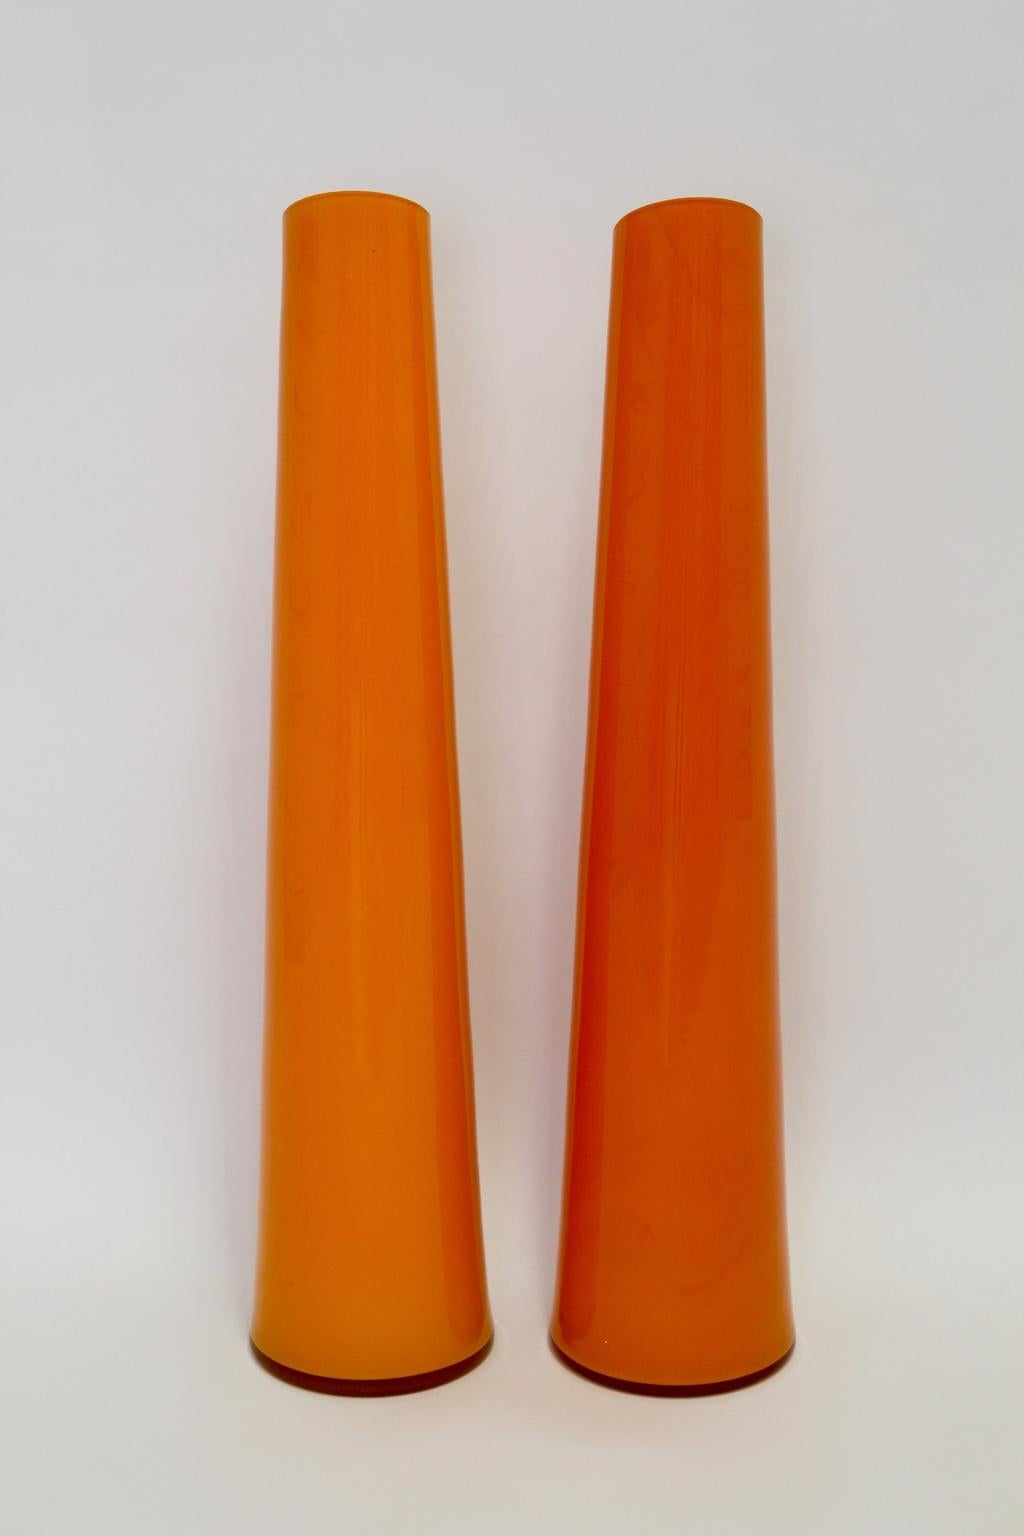 Modernist duo pair of orange glass vessels or vases 1990s. Italy.
This presented duett of orange glass vases work perfectly as bold color splash in your organic environment.
Very good vintage condition
approx. measures:
Diameter: 22 cm
Height: 100